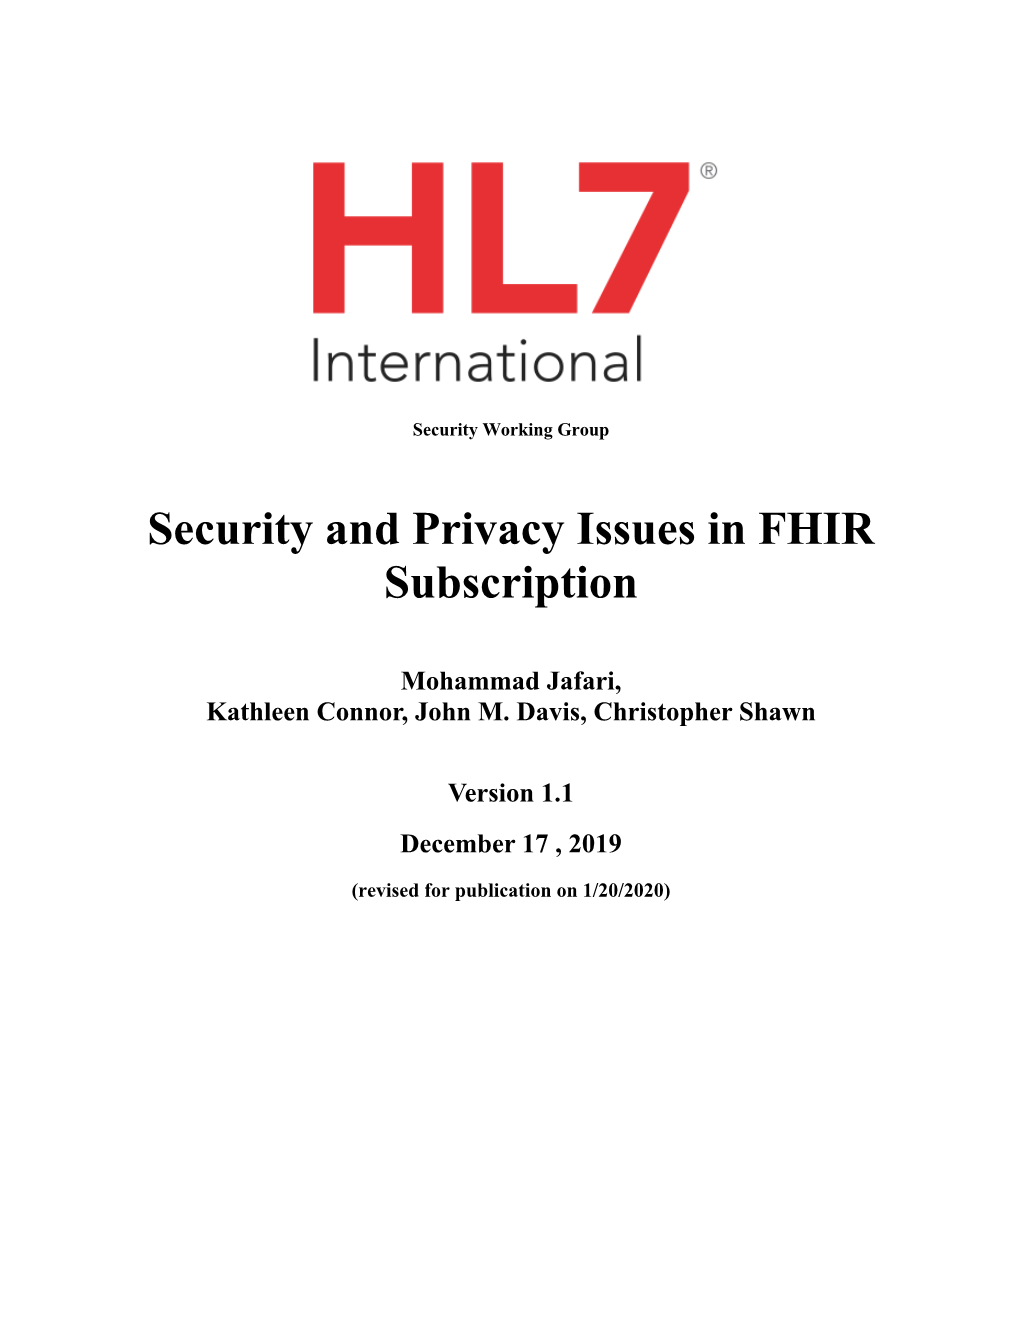 Security and Privacy Issues in FHIR Subscription